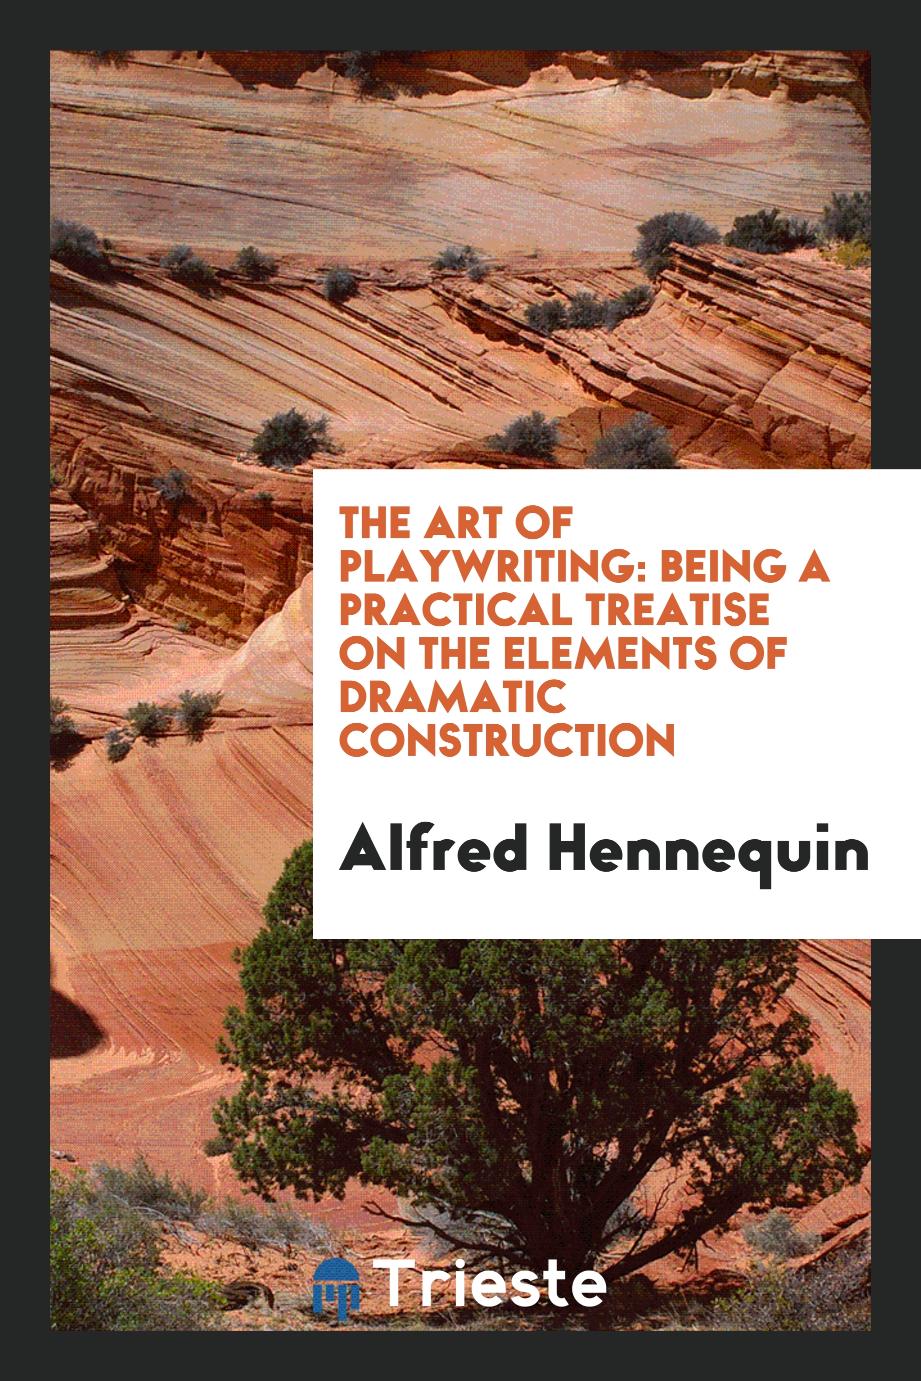 The Art of Playwriting: Being a Practical Treatise on the Elements of Dramatic Construction